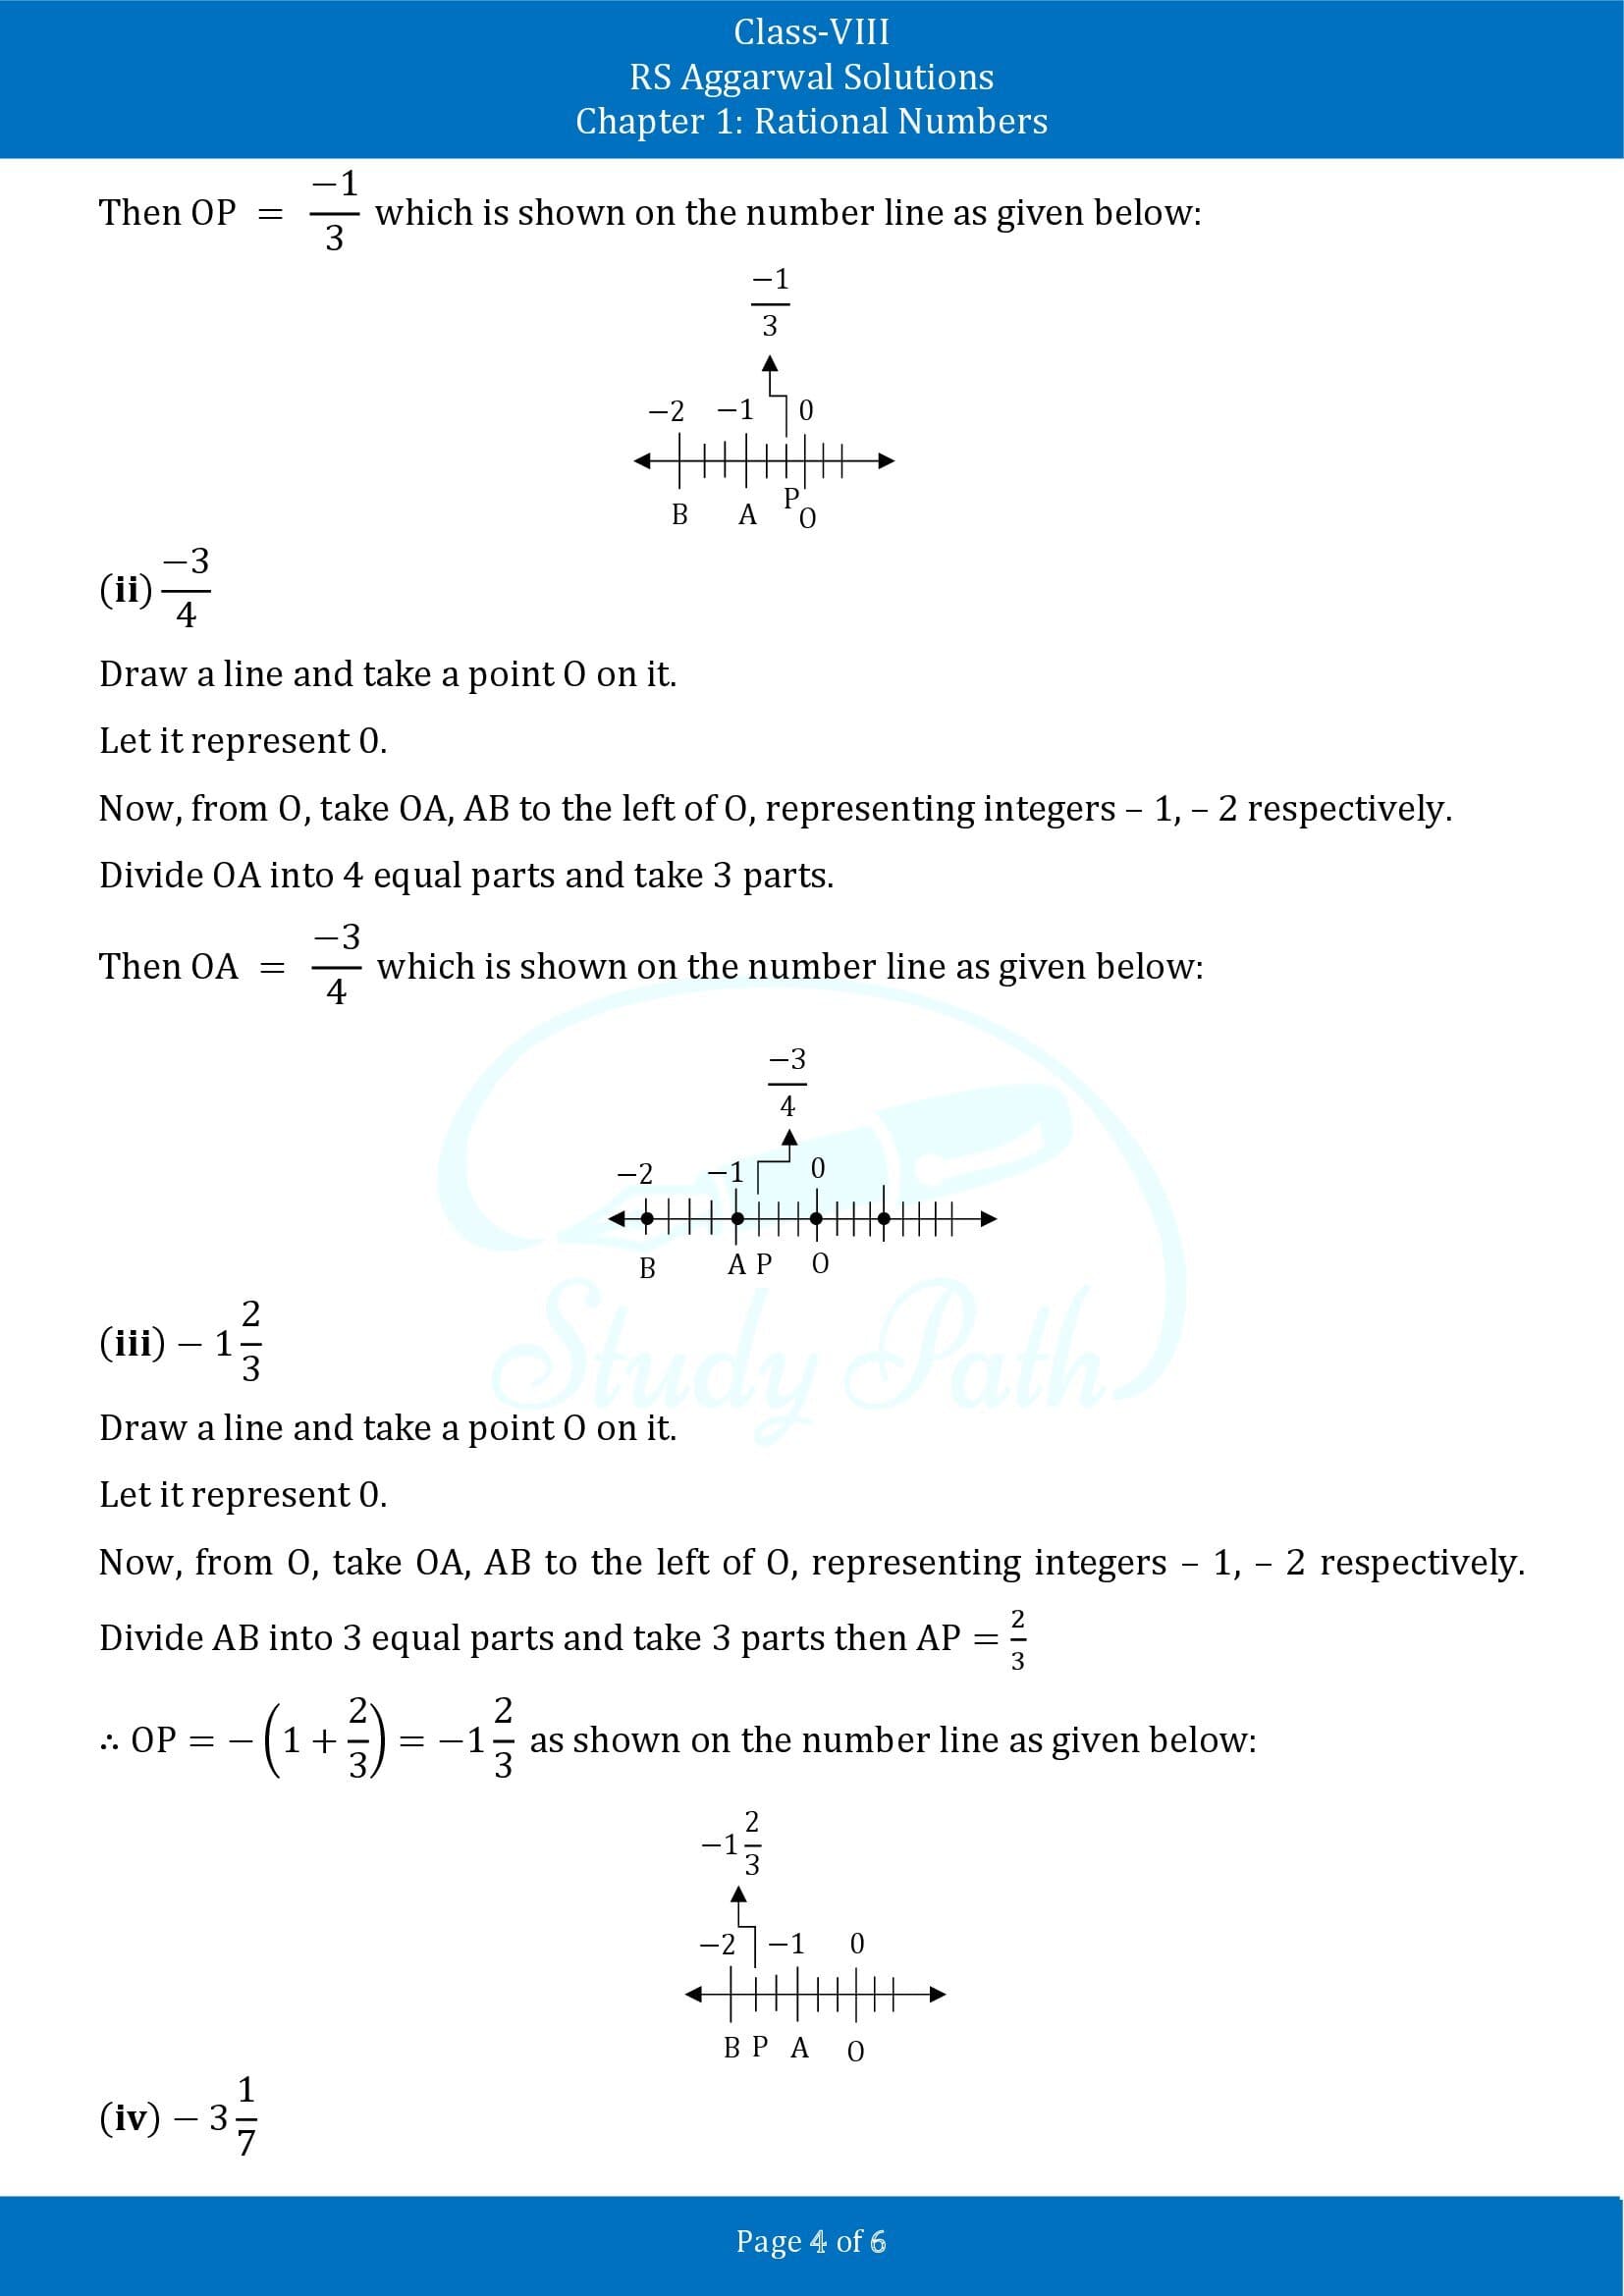 RS Aggarwal Solutions Class 8 Chapter 1 Rational Numbers Exercise 1B 00004